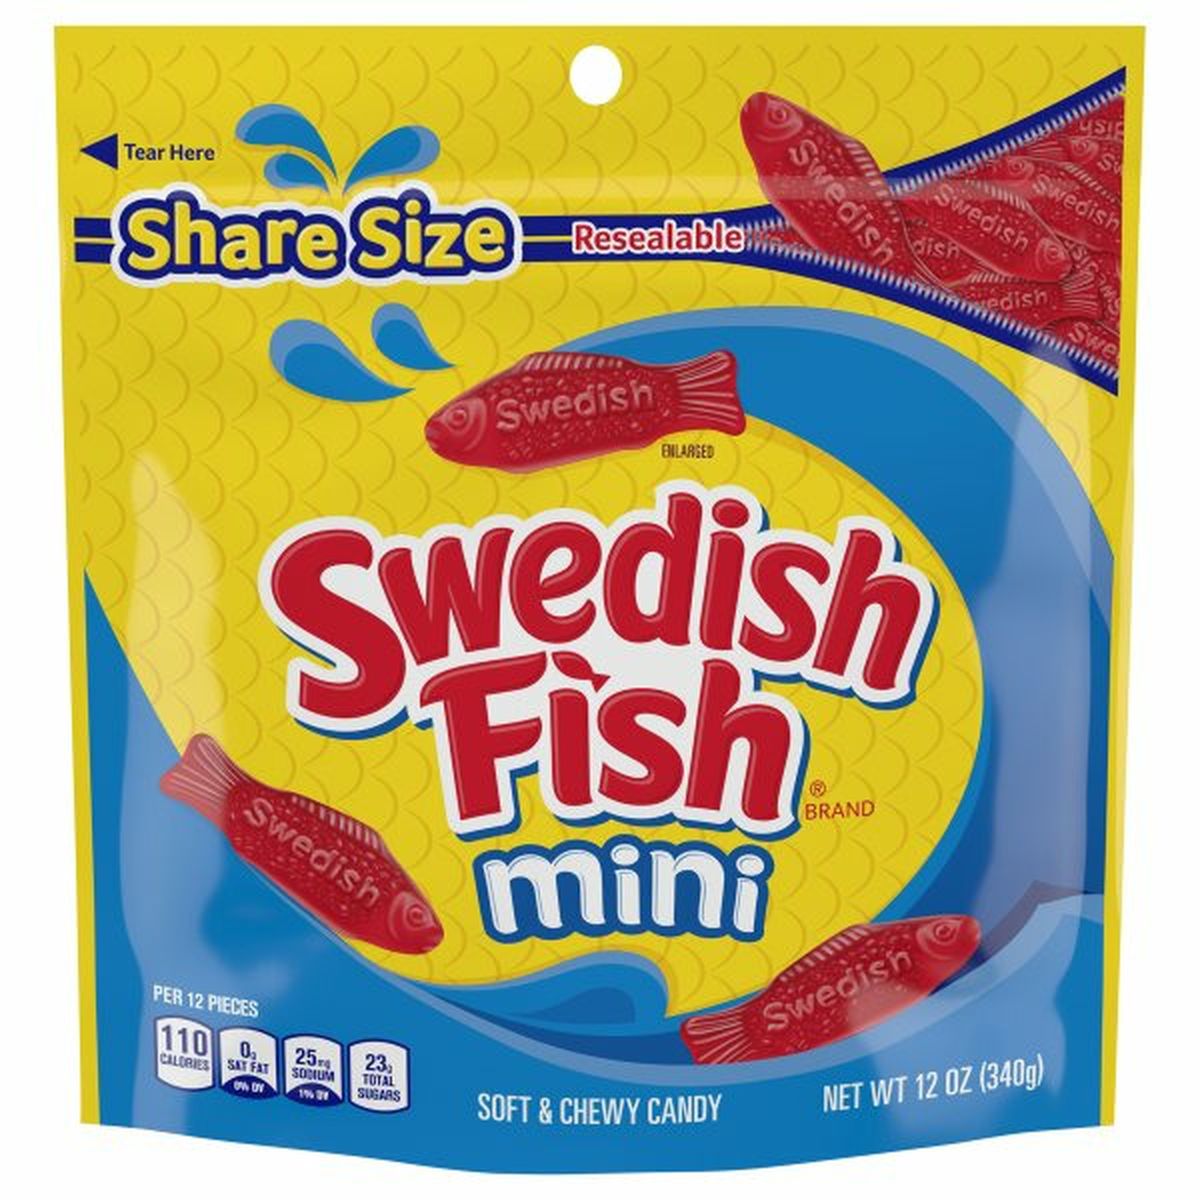 Calories in Swedish Fish Candy, Soft & Chewy, Mini, Share Size